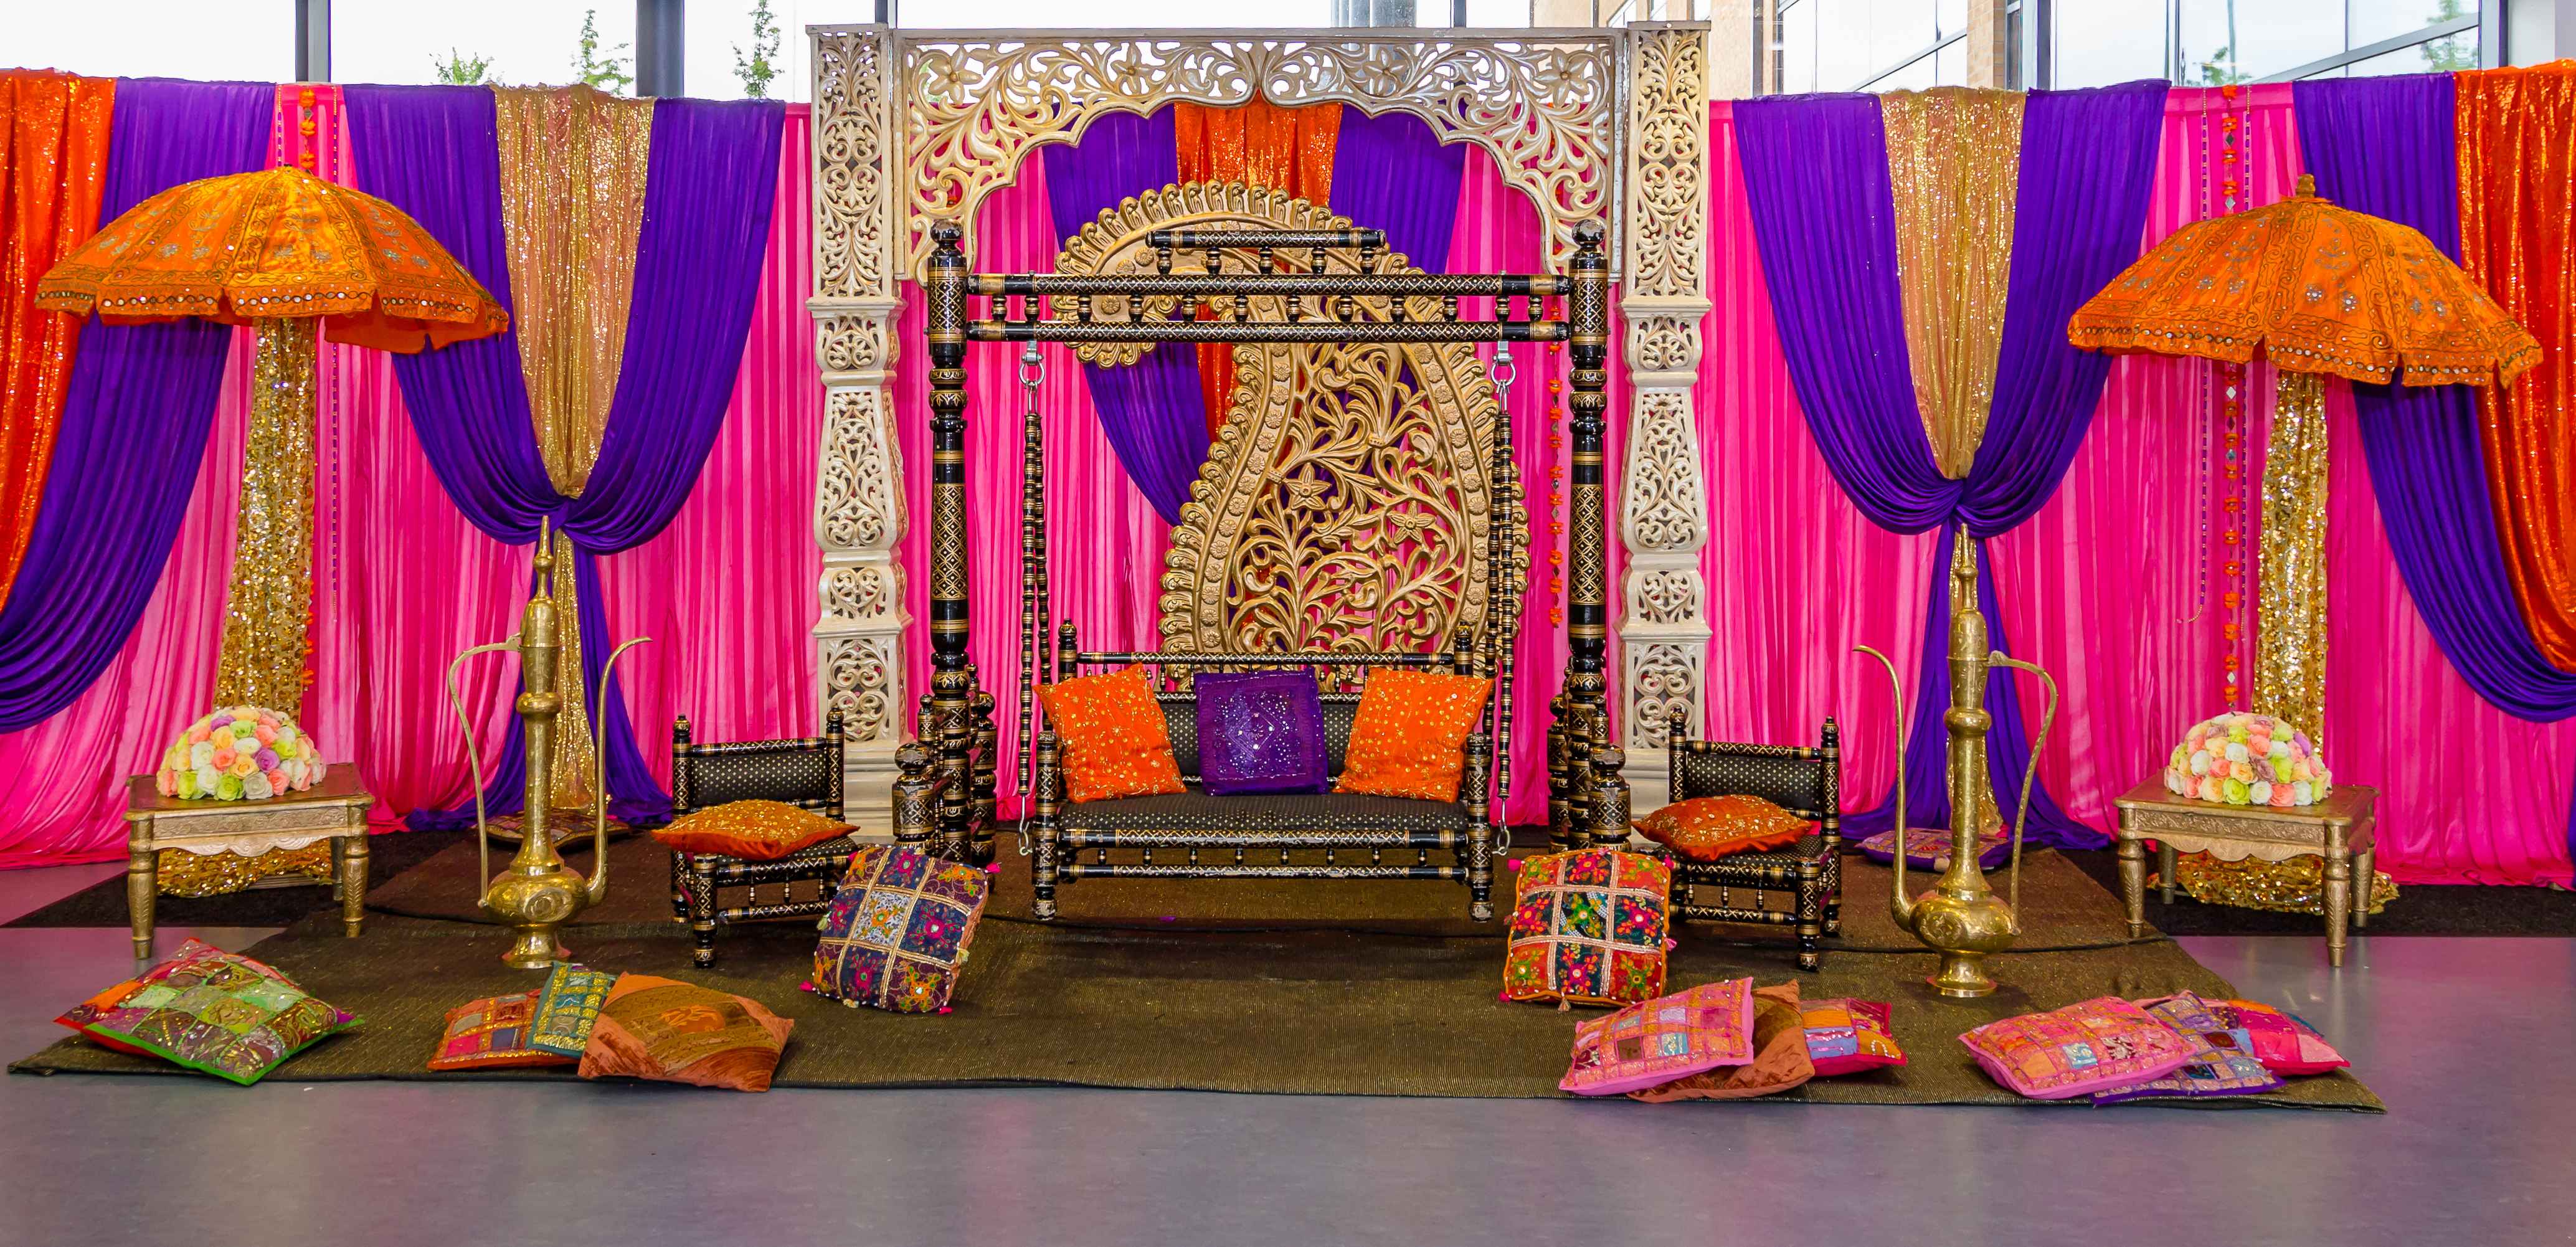 Wedding Decor Ideas For Indian Winter Wedding At Home